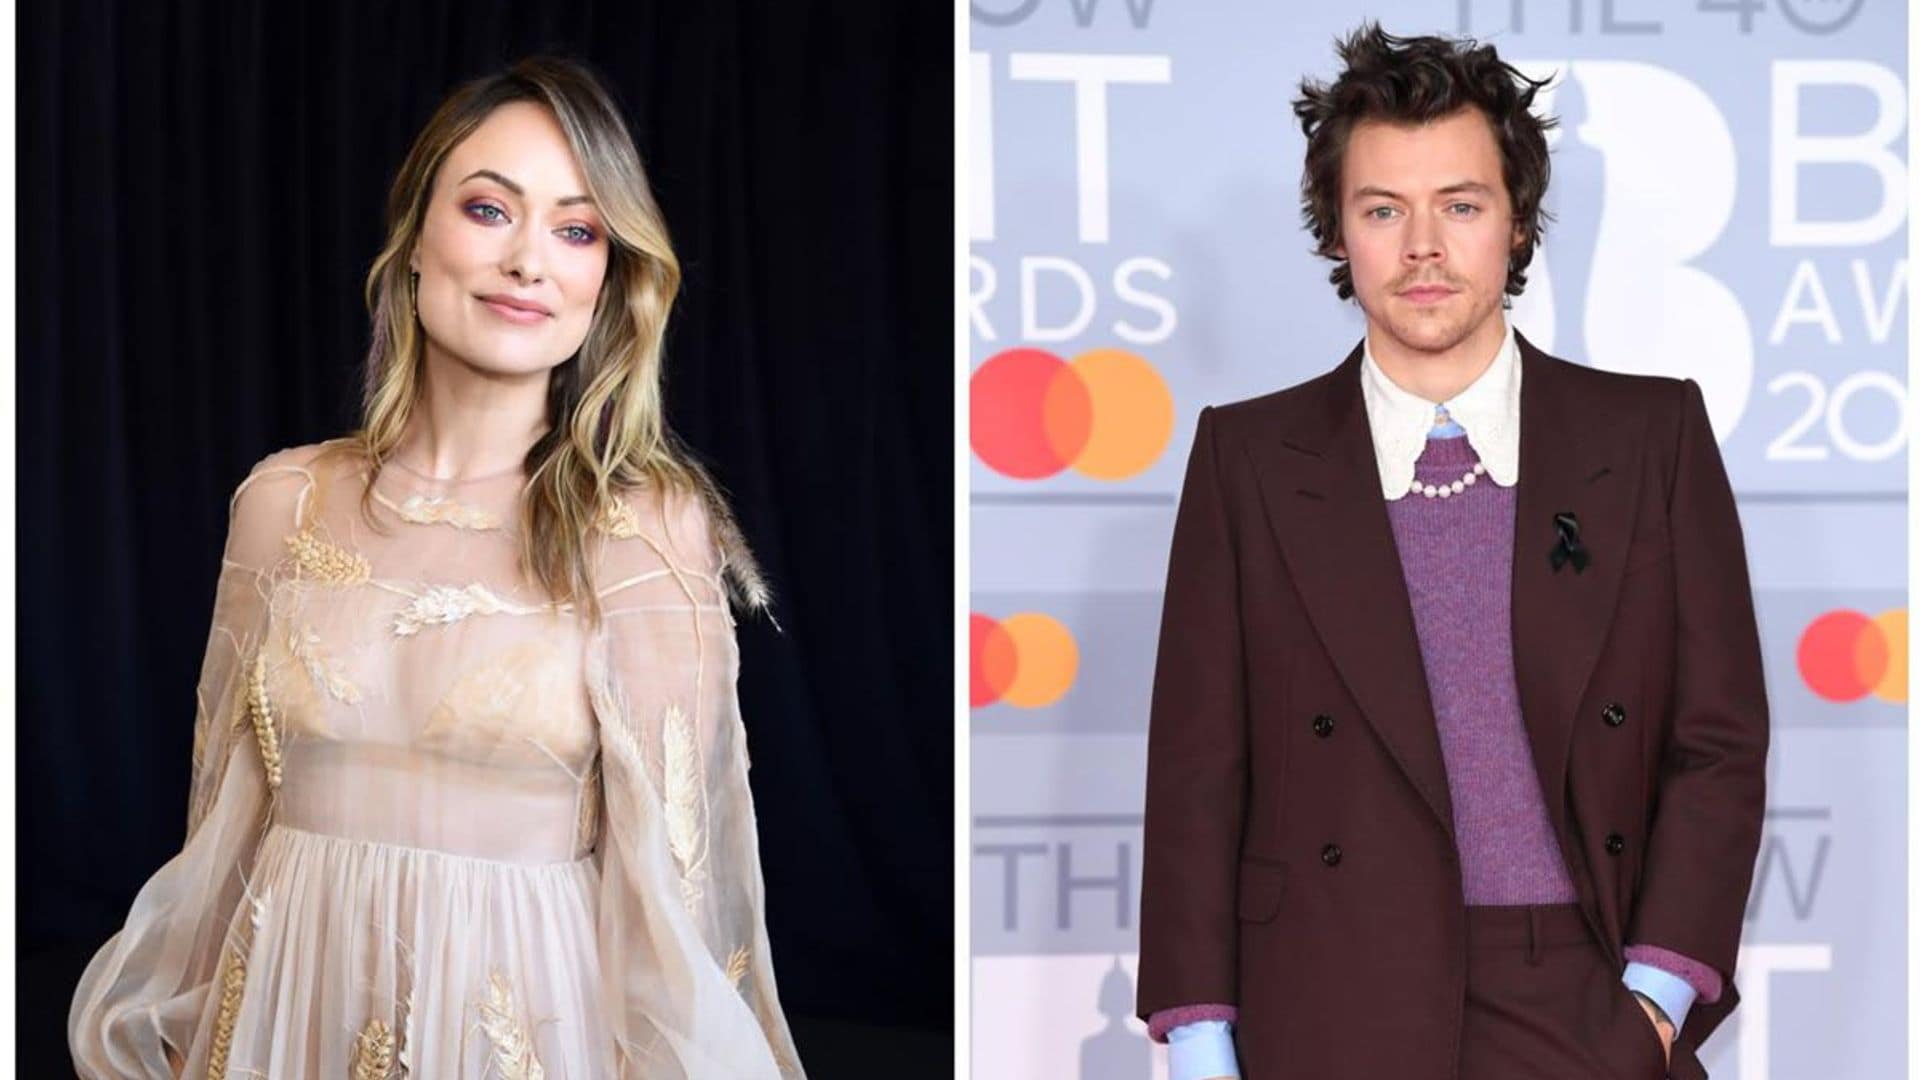 Olivia Wilde praised Harry Styles for his work in ‘Don’t Worry Darling’